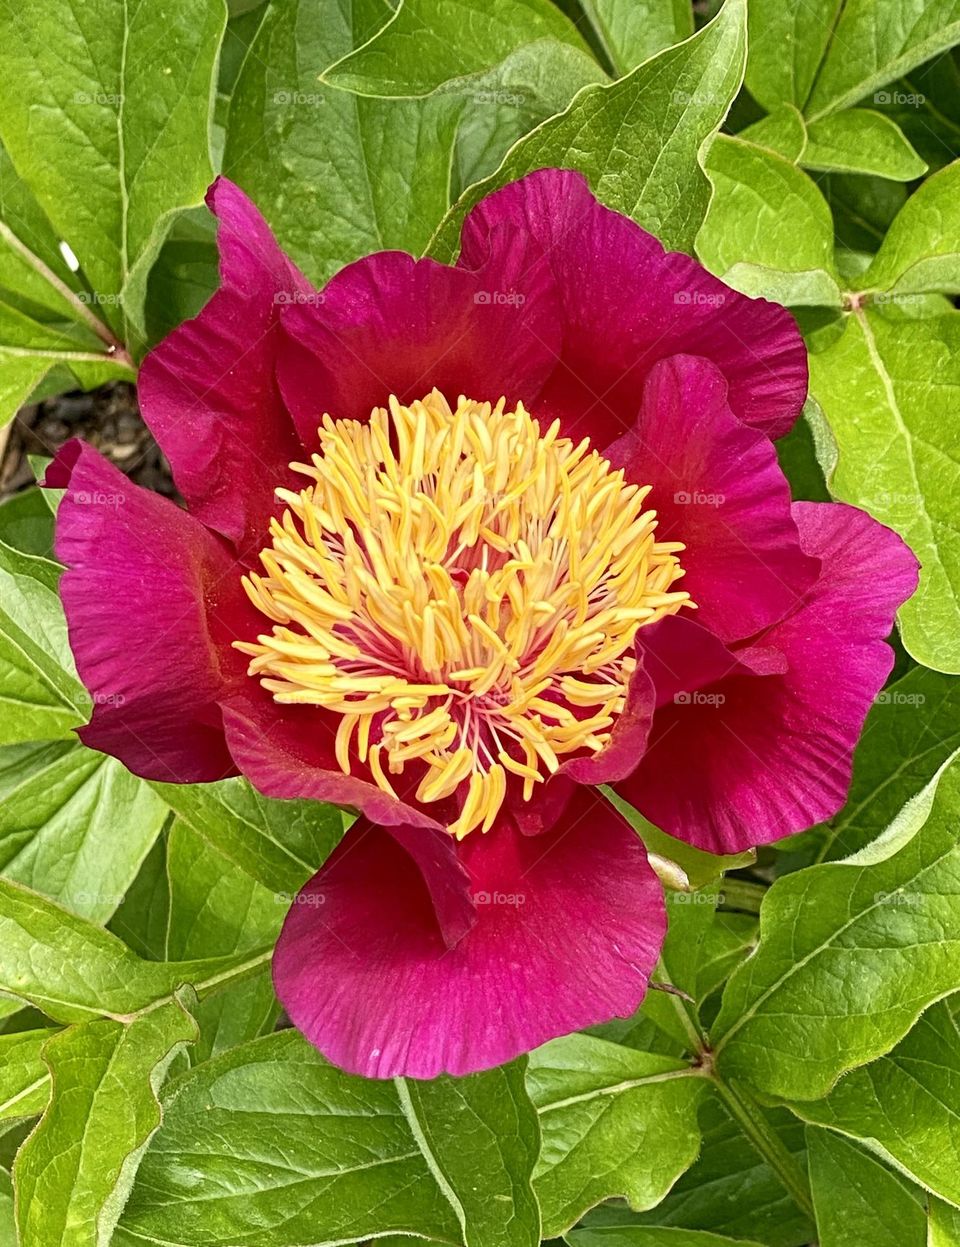 Hot pink peony with yellow center